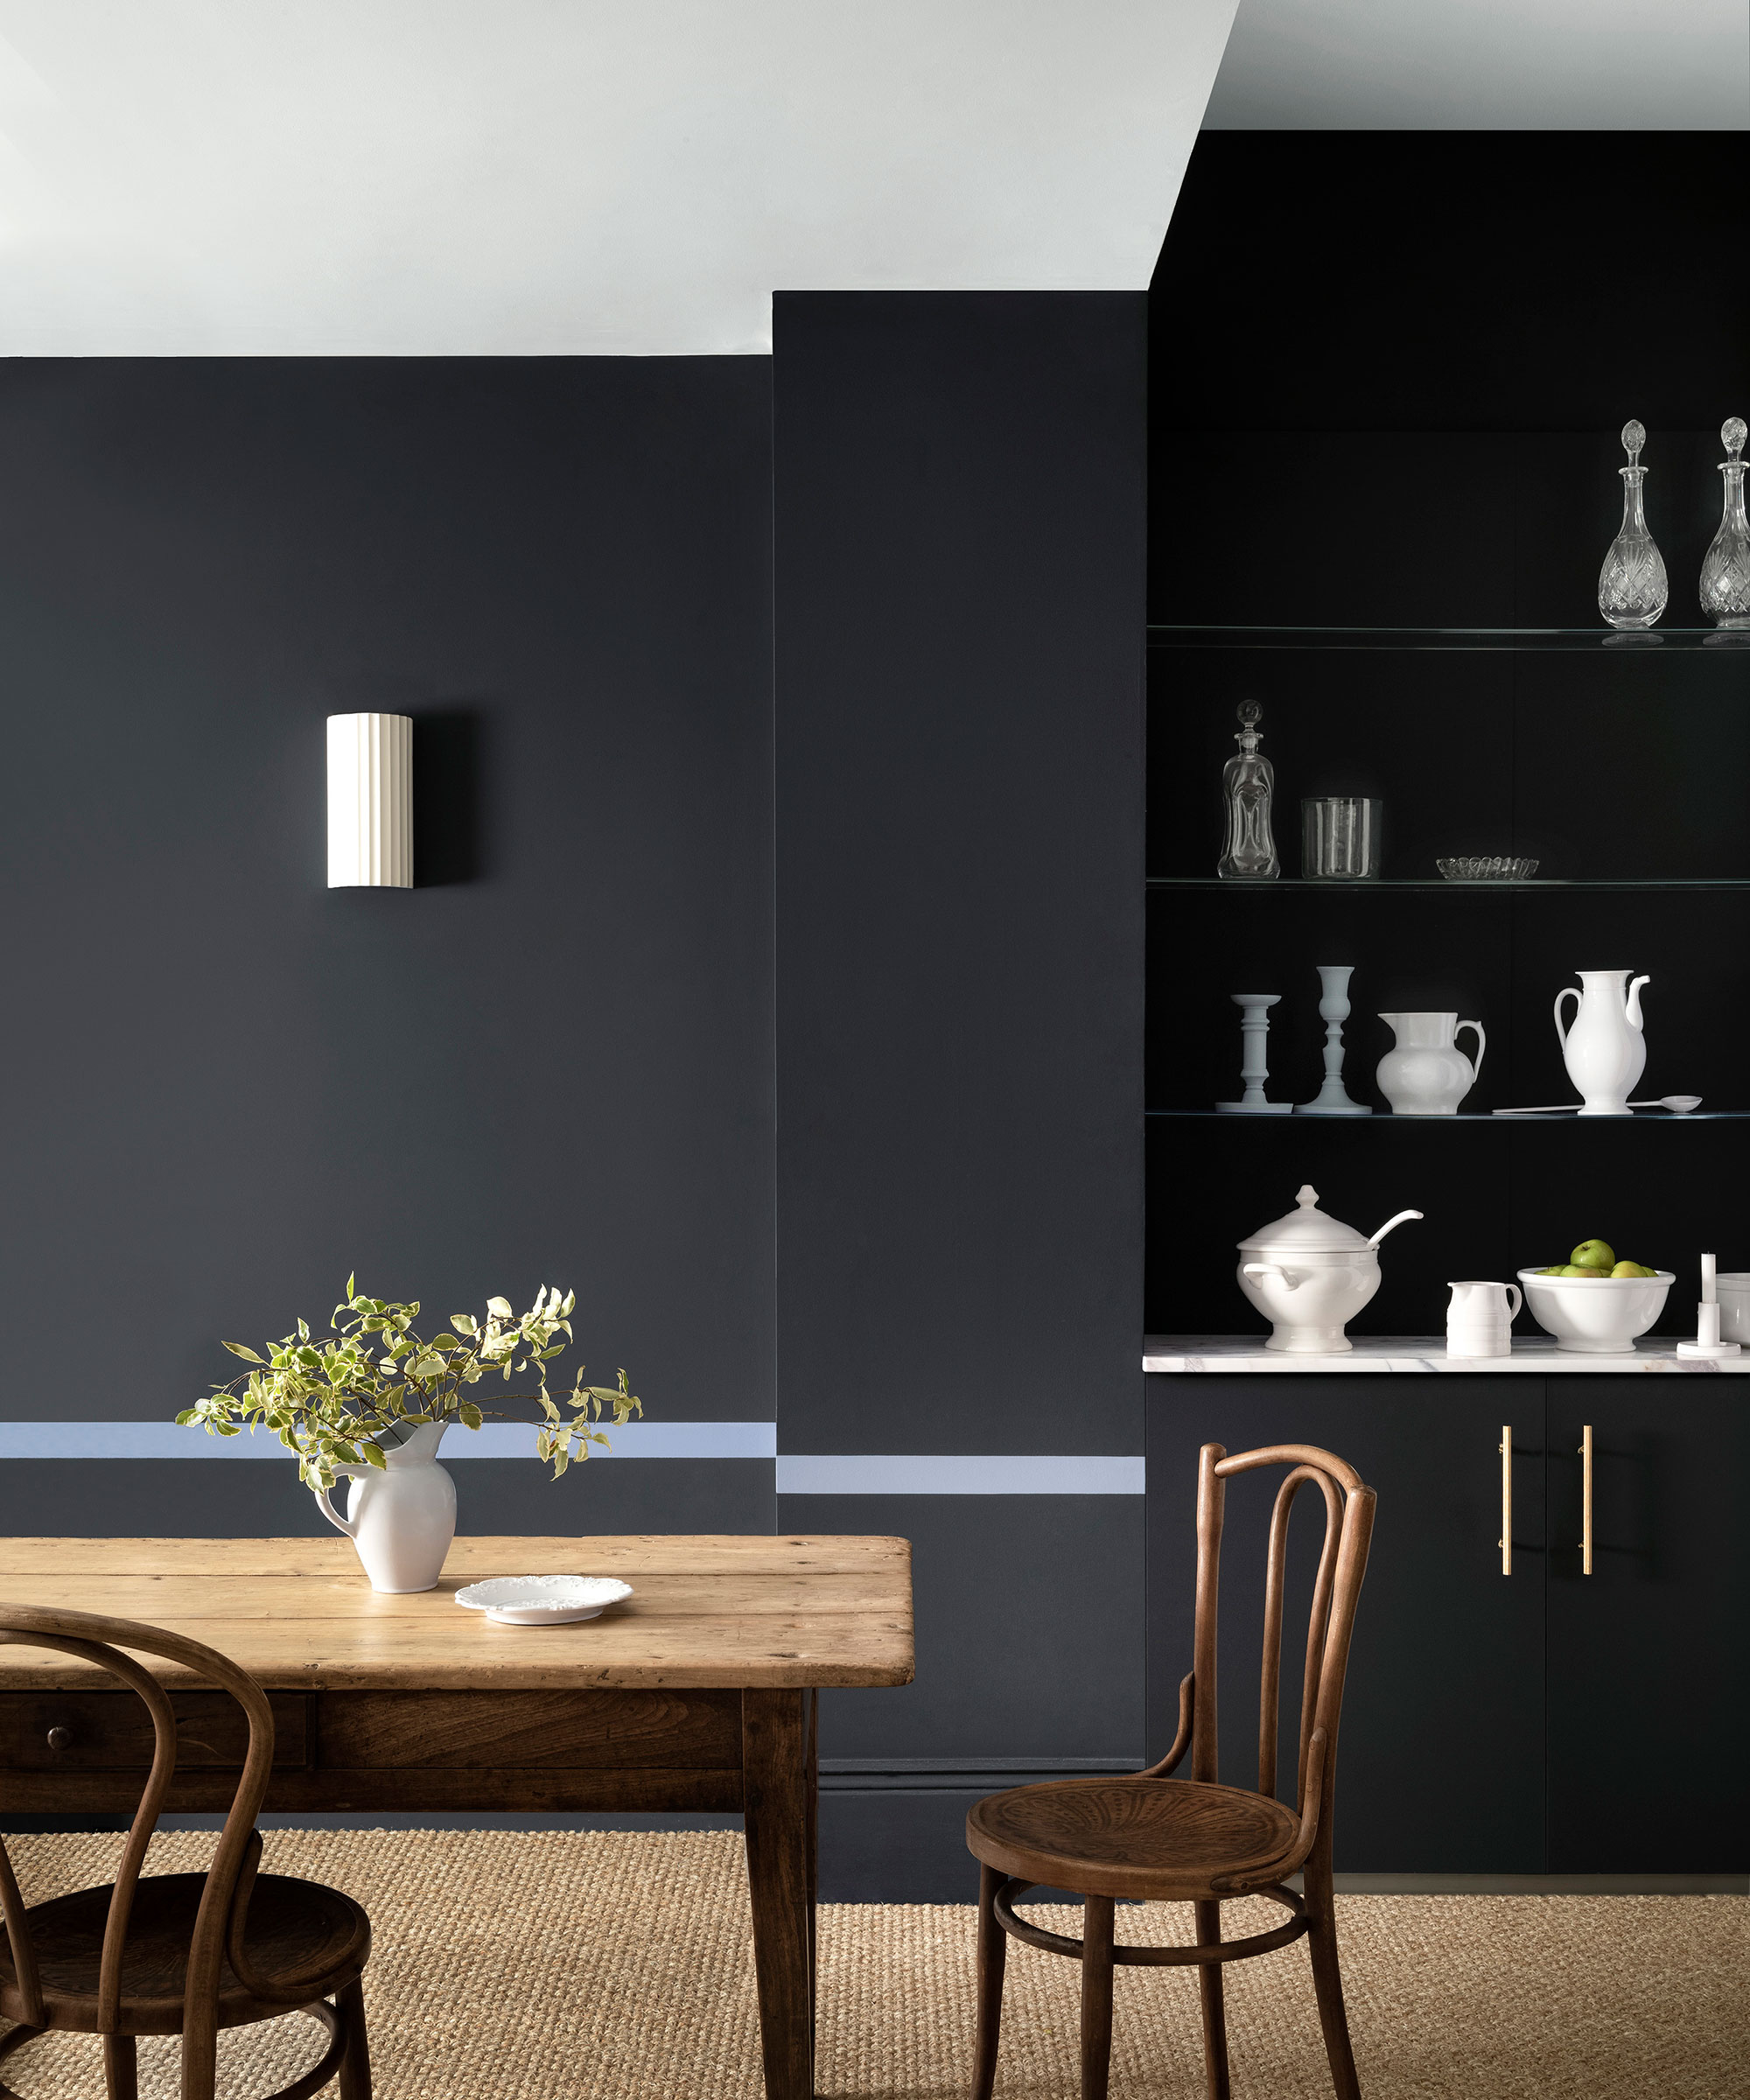 Dining room color ideas: 12 paint inspiration shades | Homes & Gardens